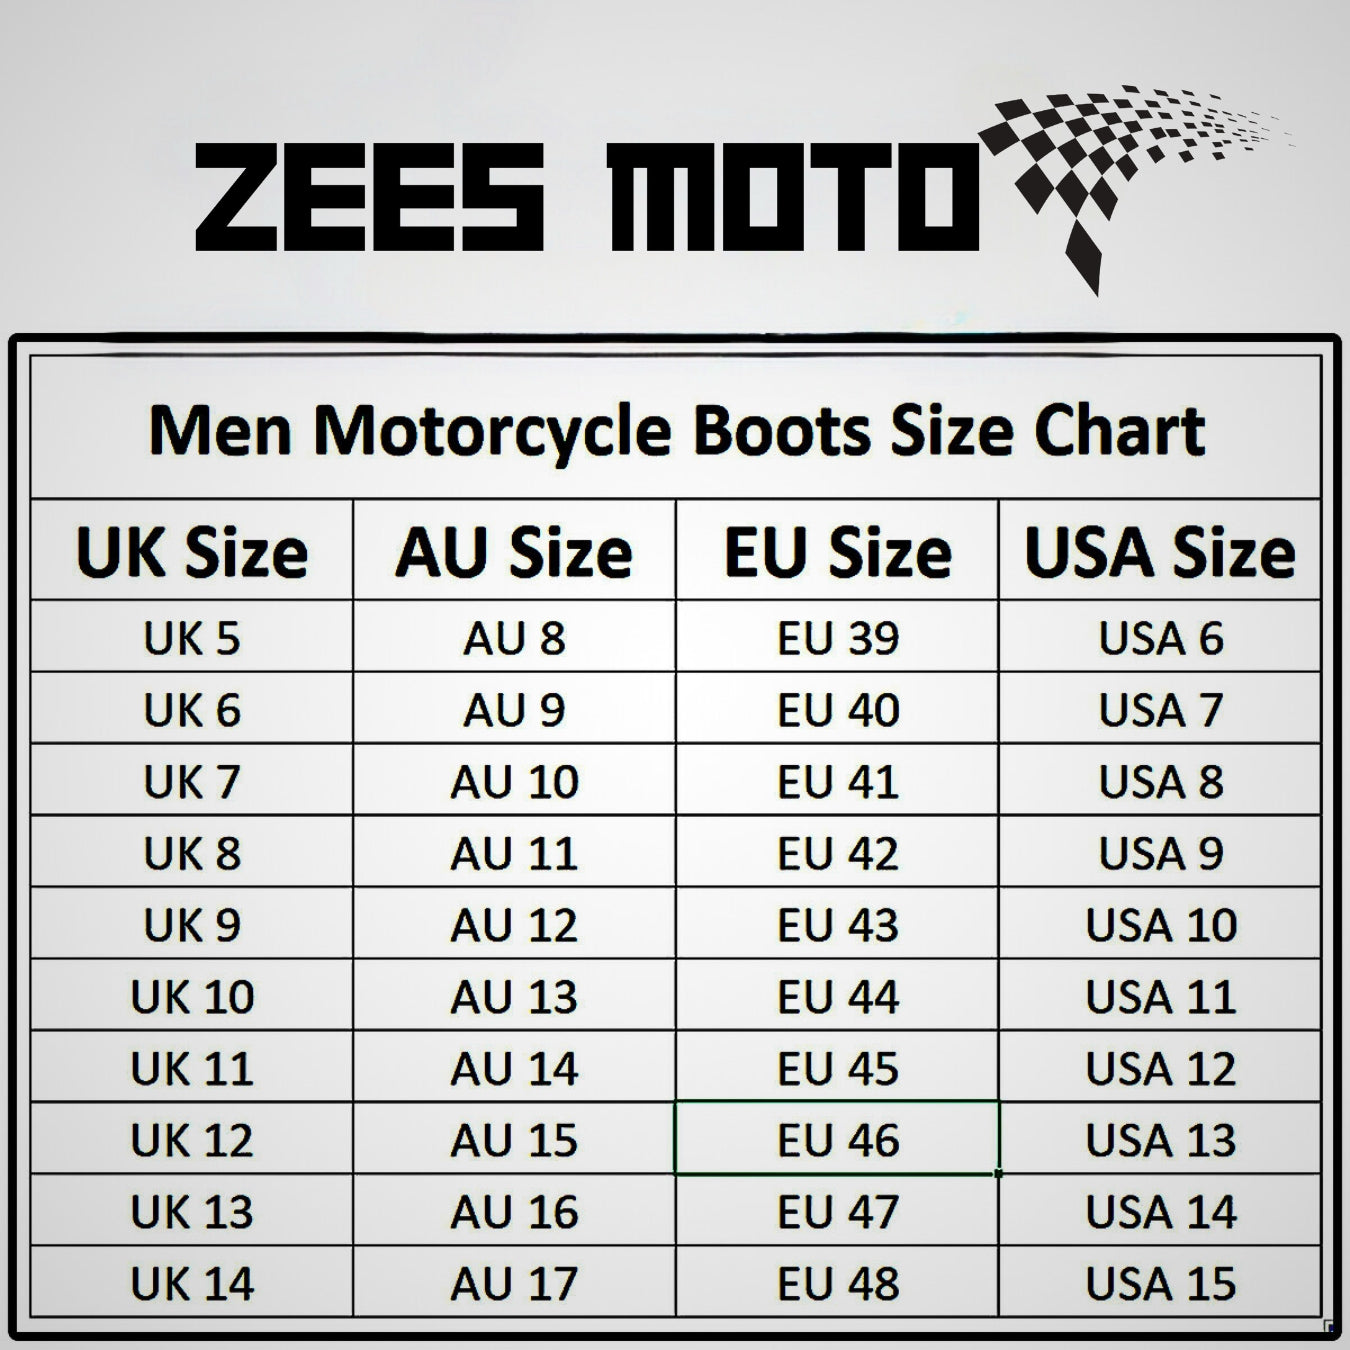 ZMB-019 Customized Motorcycle Boots - ZEES MOTO